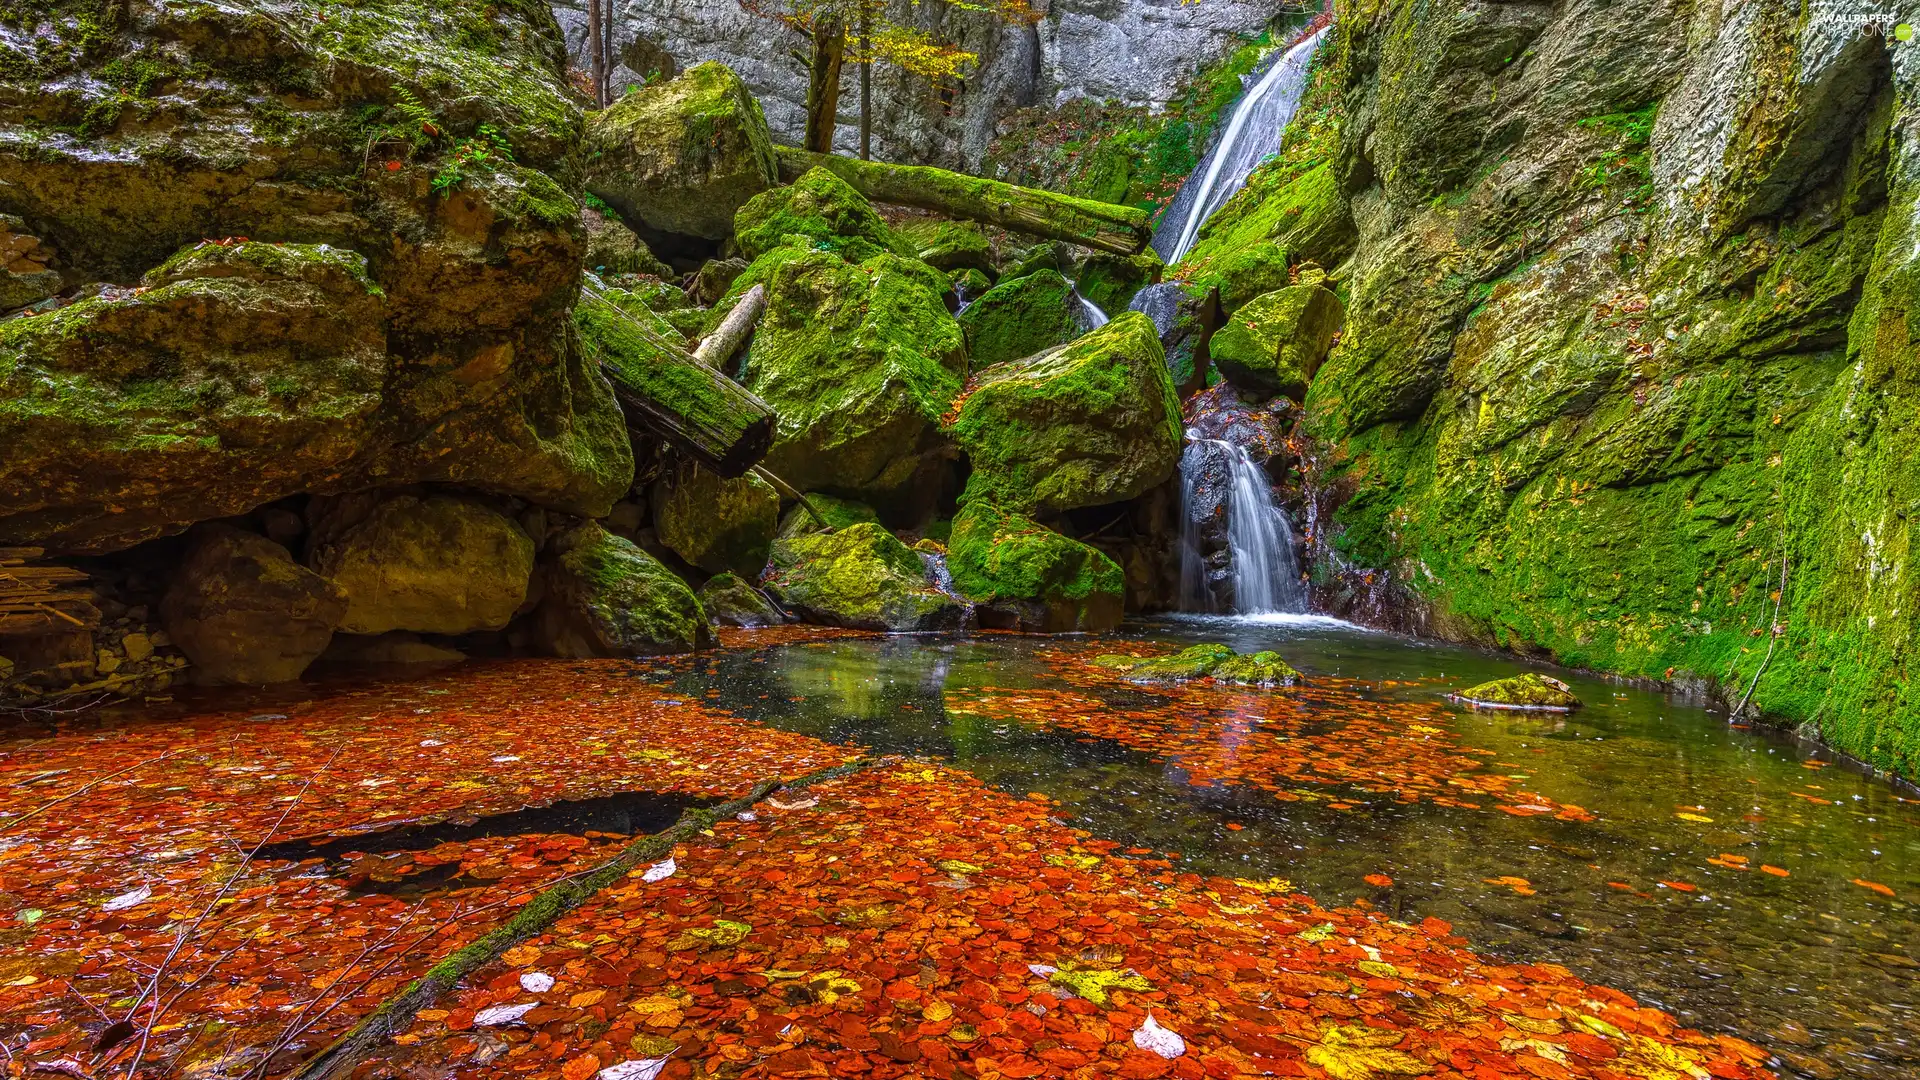 Stones, rocks, viewes, River, trees, mossy, waterfall, Leaf